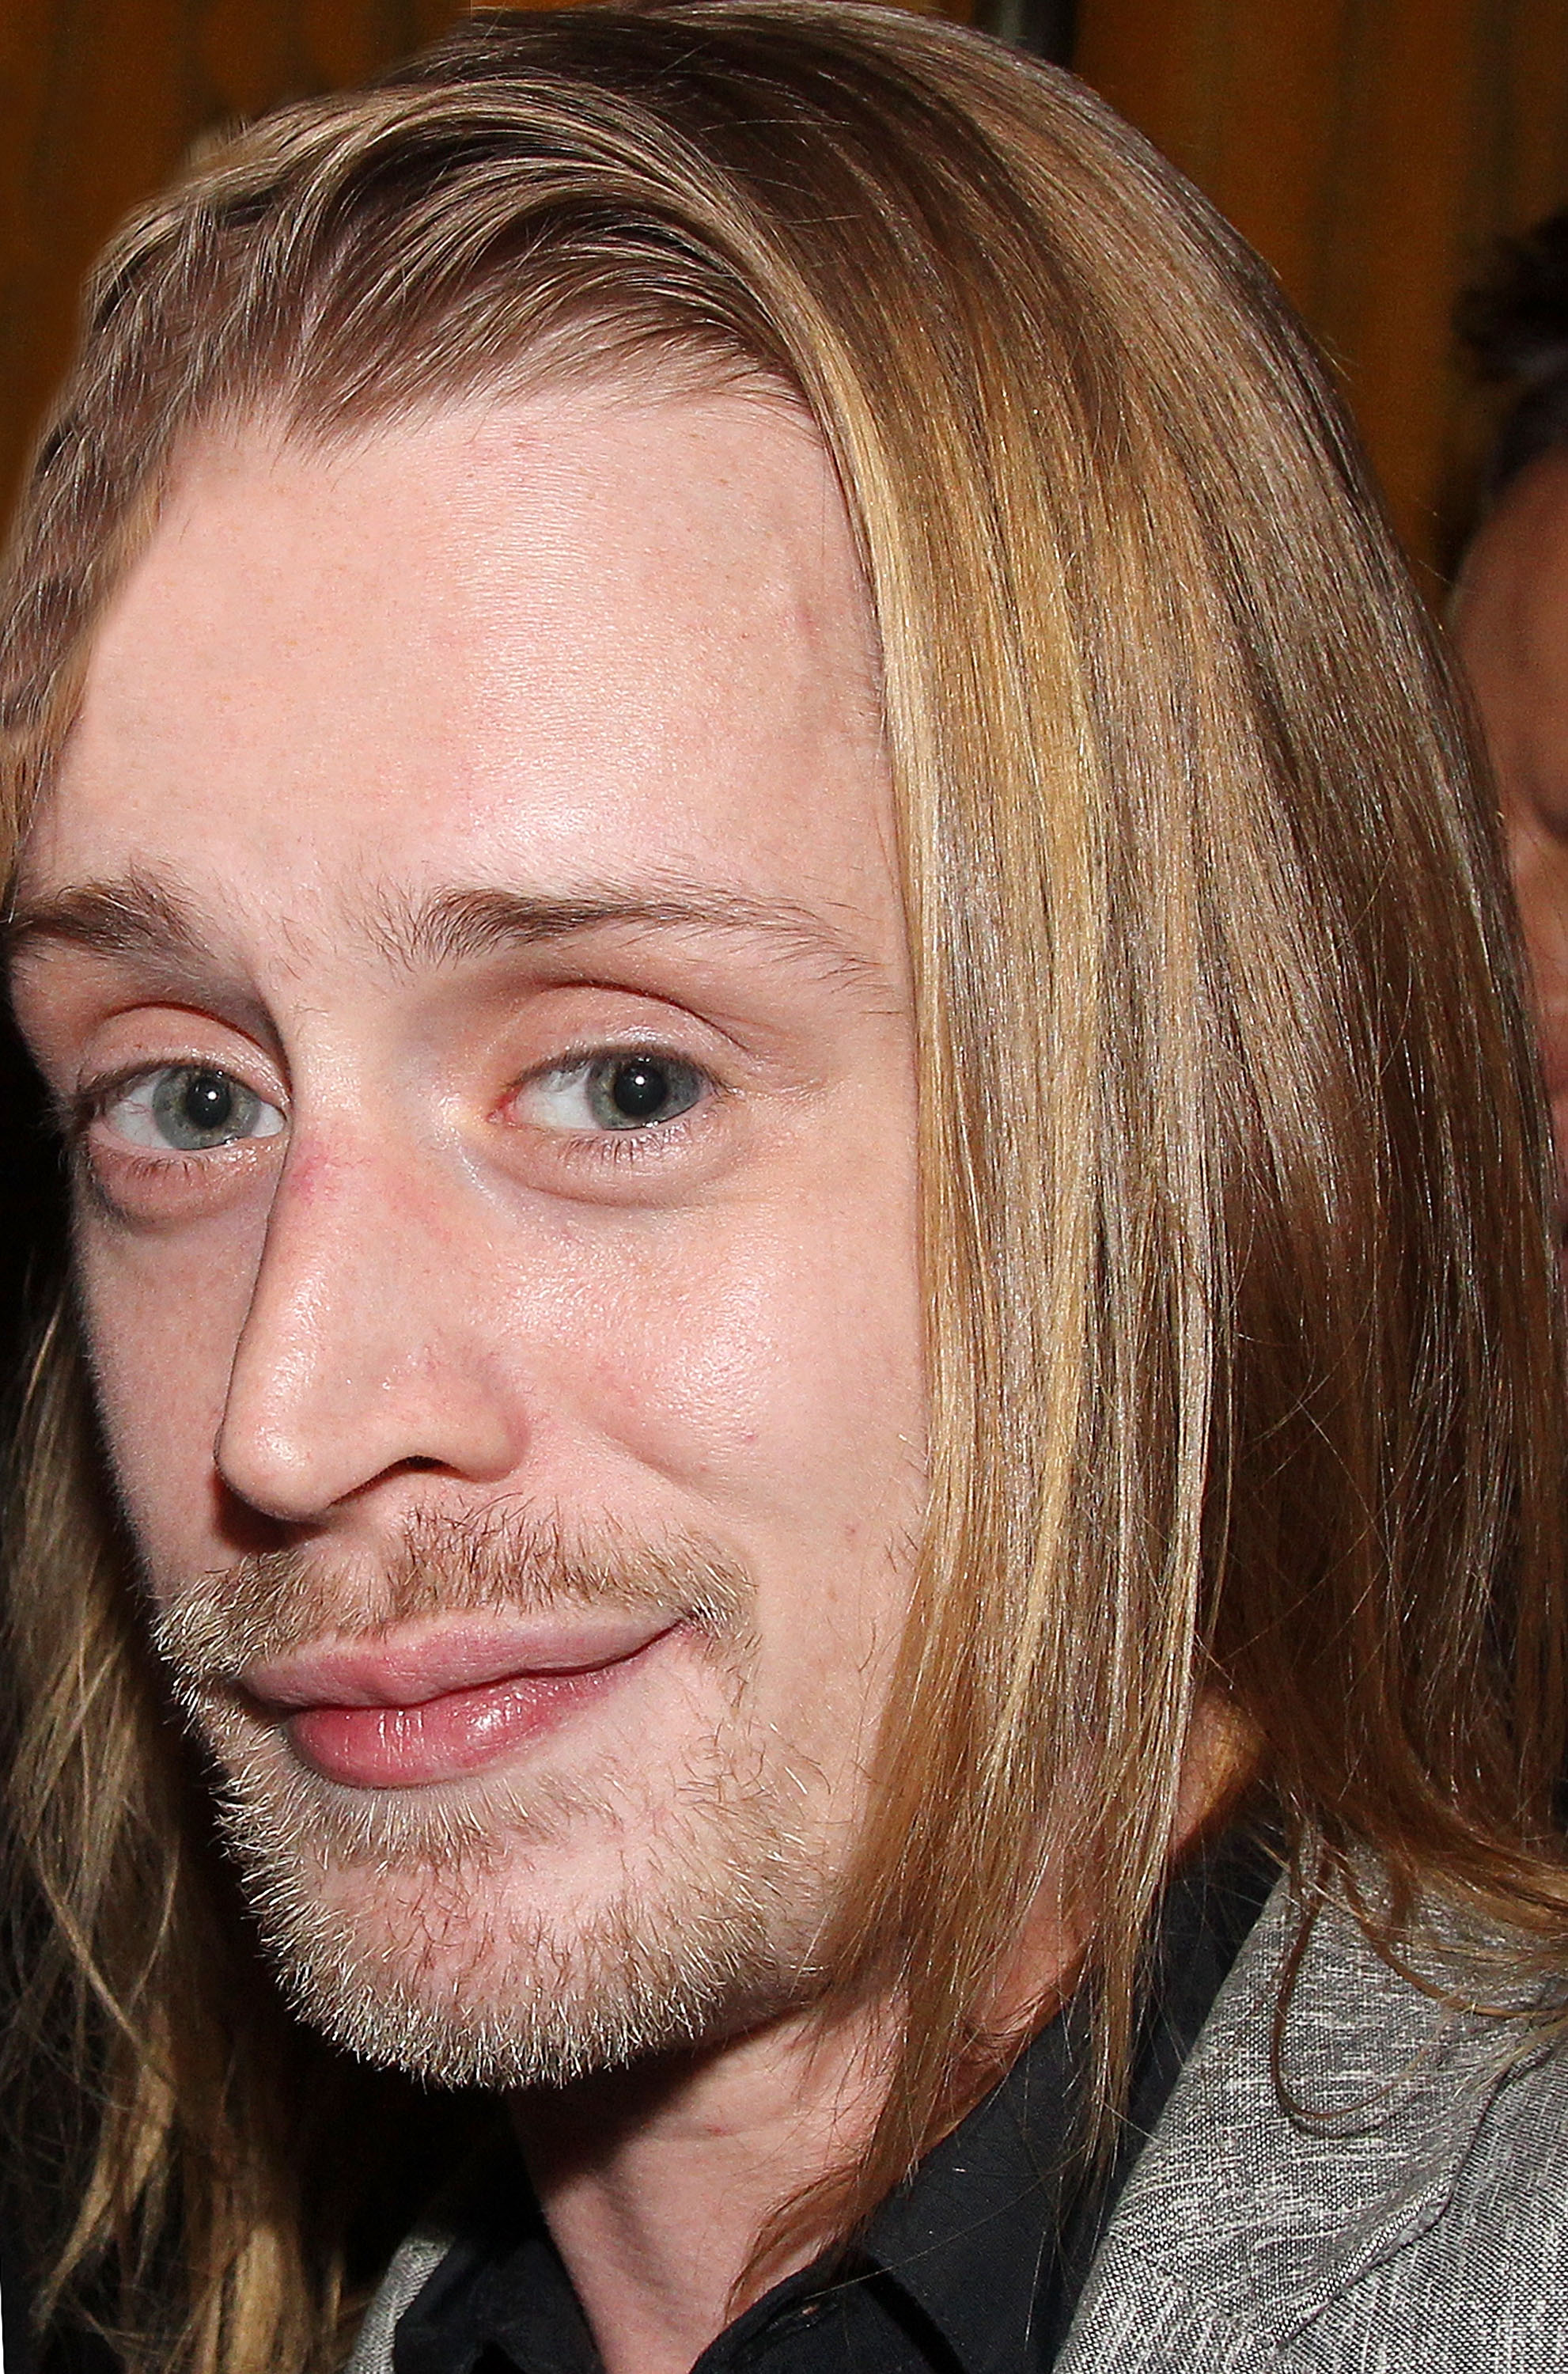 Macaulay Culkin at The Opening Night of "This Is Our Youth" on Broadway in New York City on September 11, 2014 | Source: Getty Images